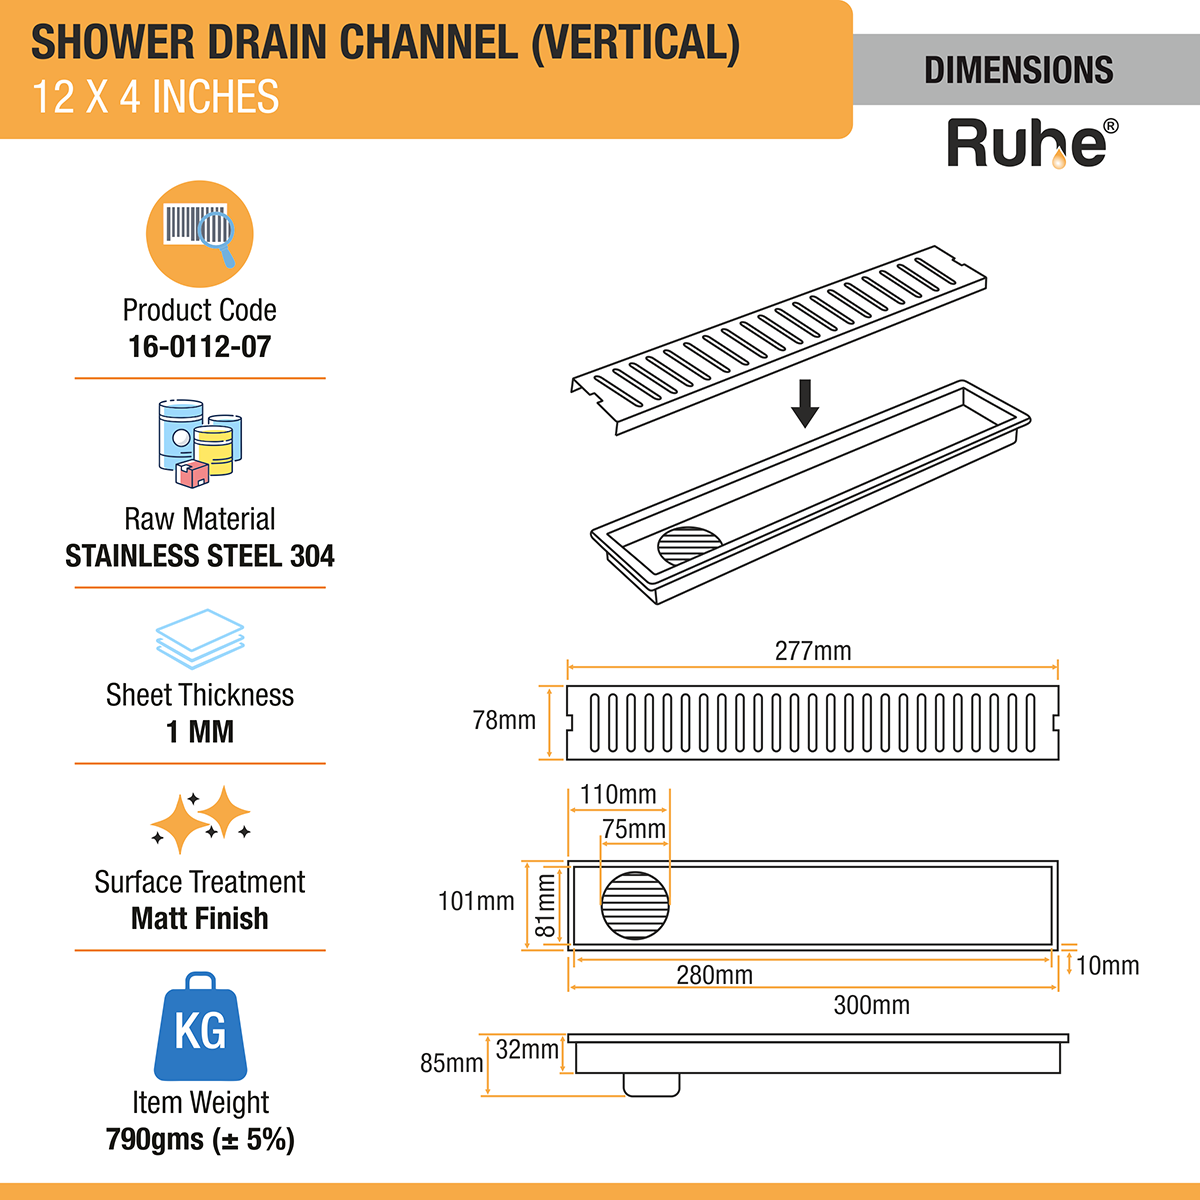 Vertical Shower Drain Channel (12 x 4 Inches) with Cockroach Trap (304 Grade) dimensions and size